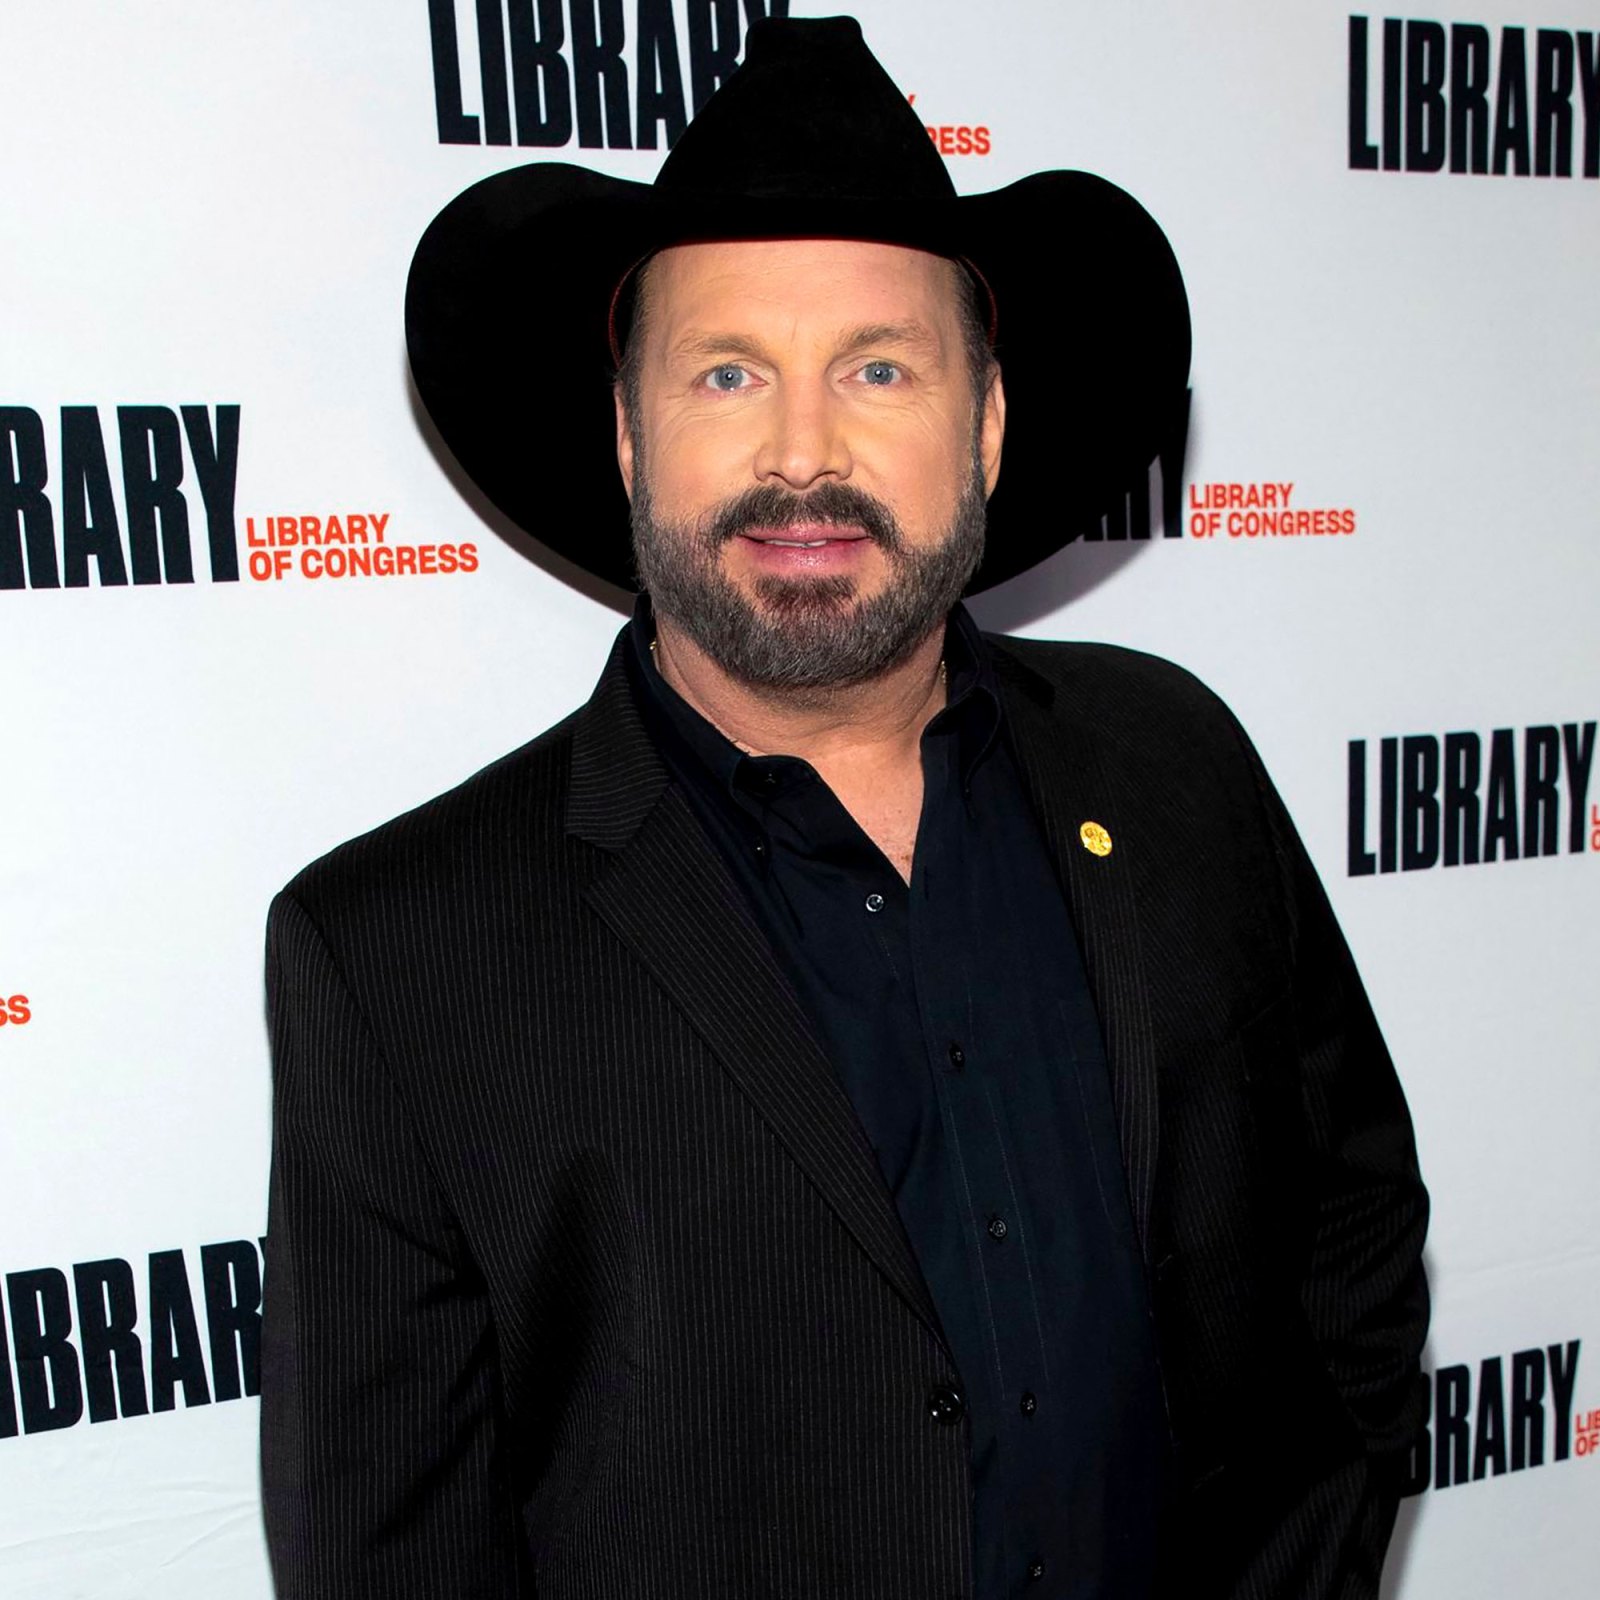 Garth Brooks to Open Entertainment Space and Bar in Nashville